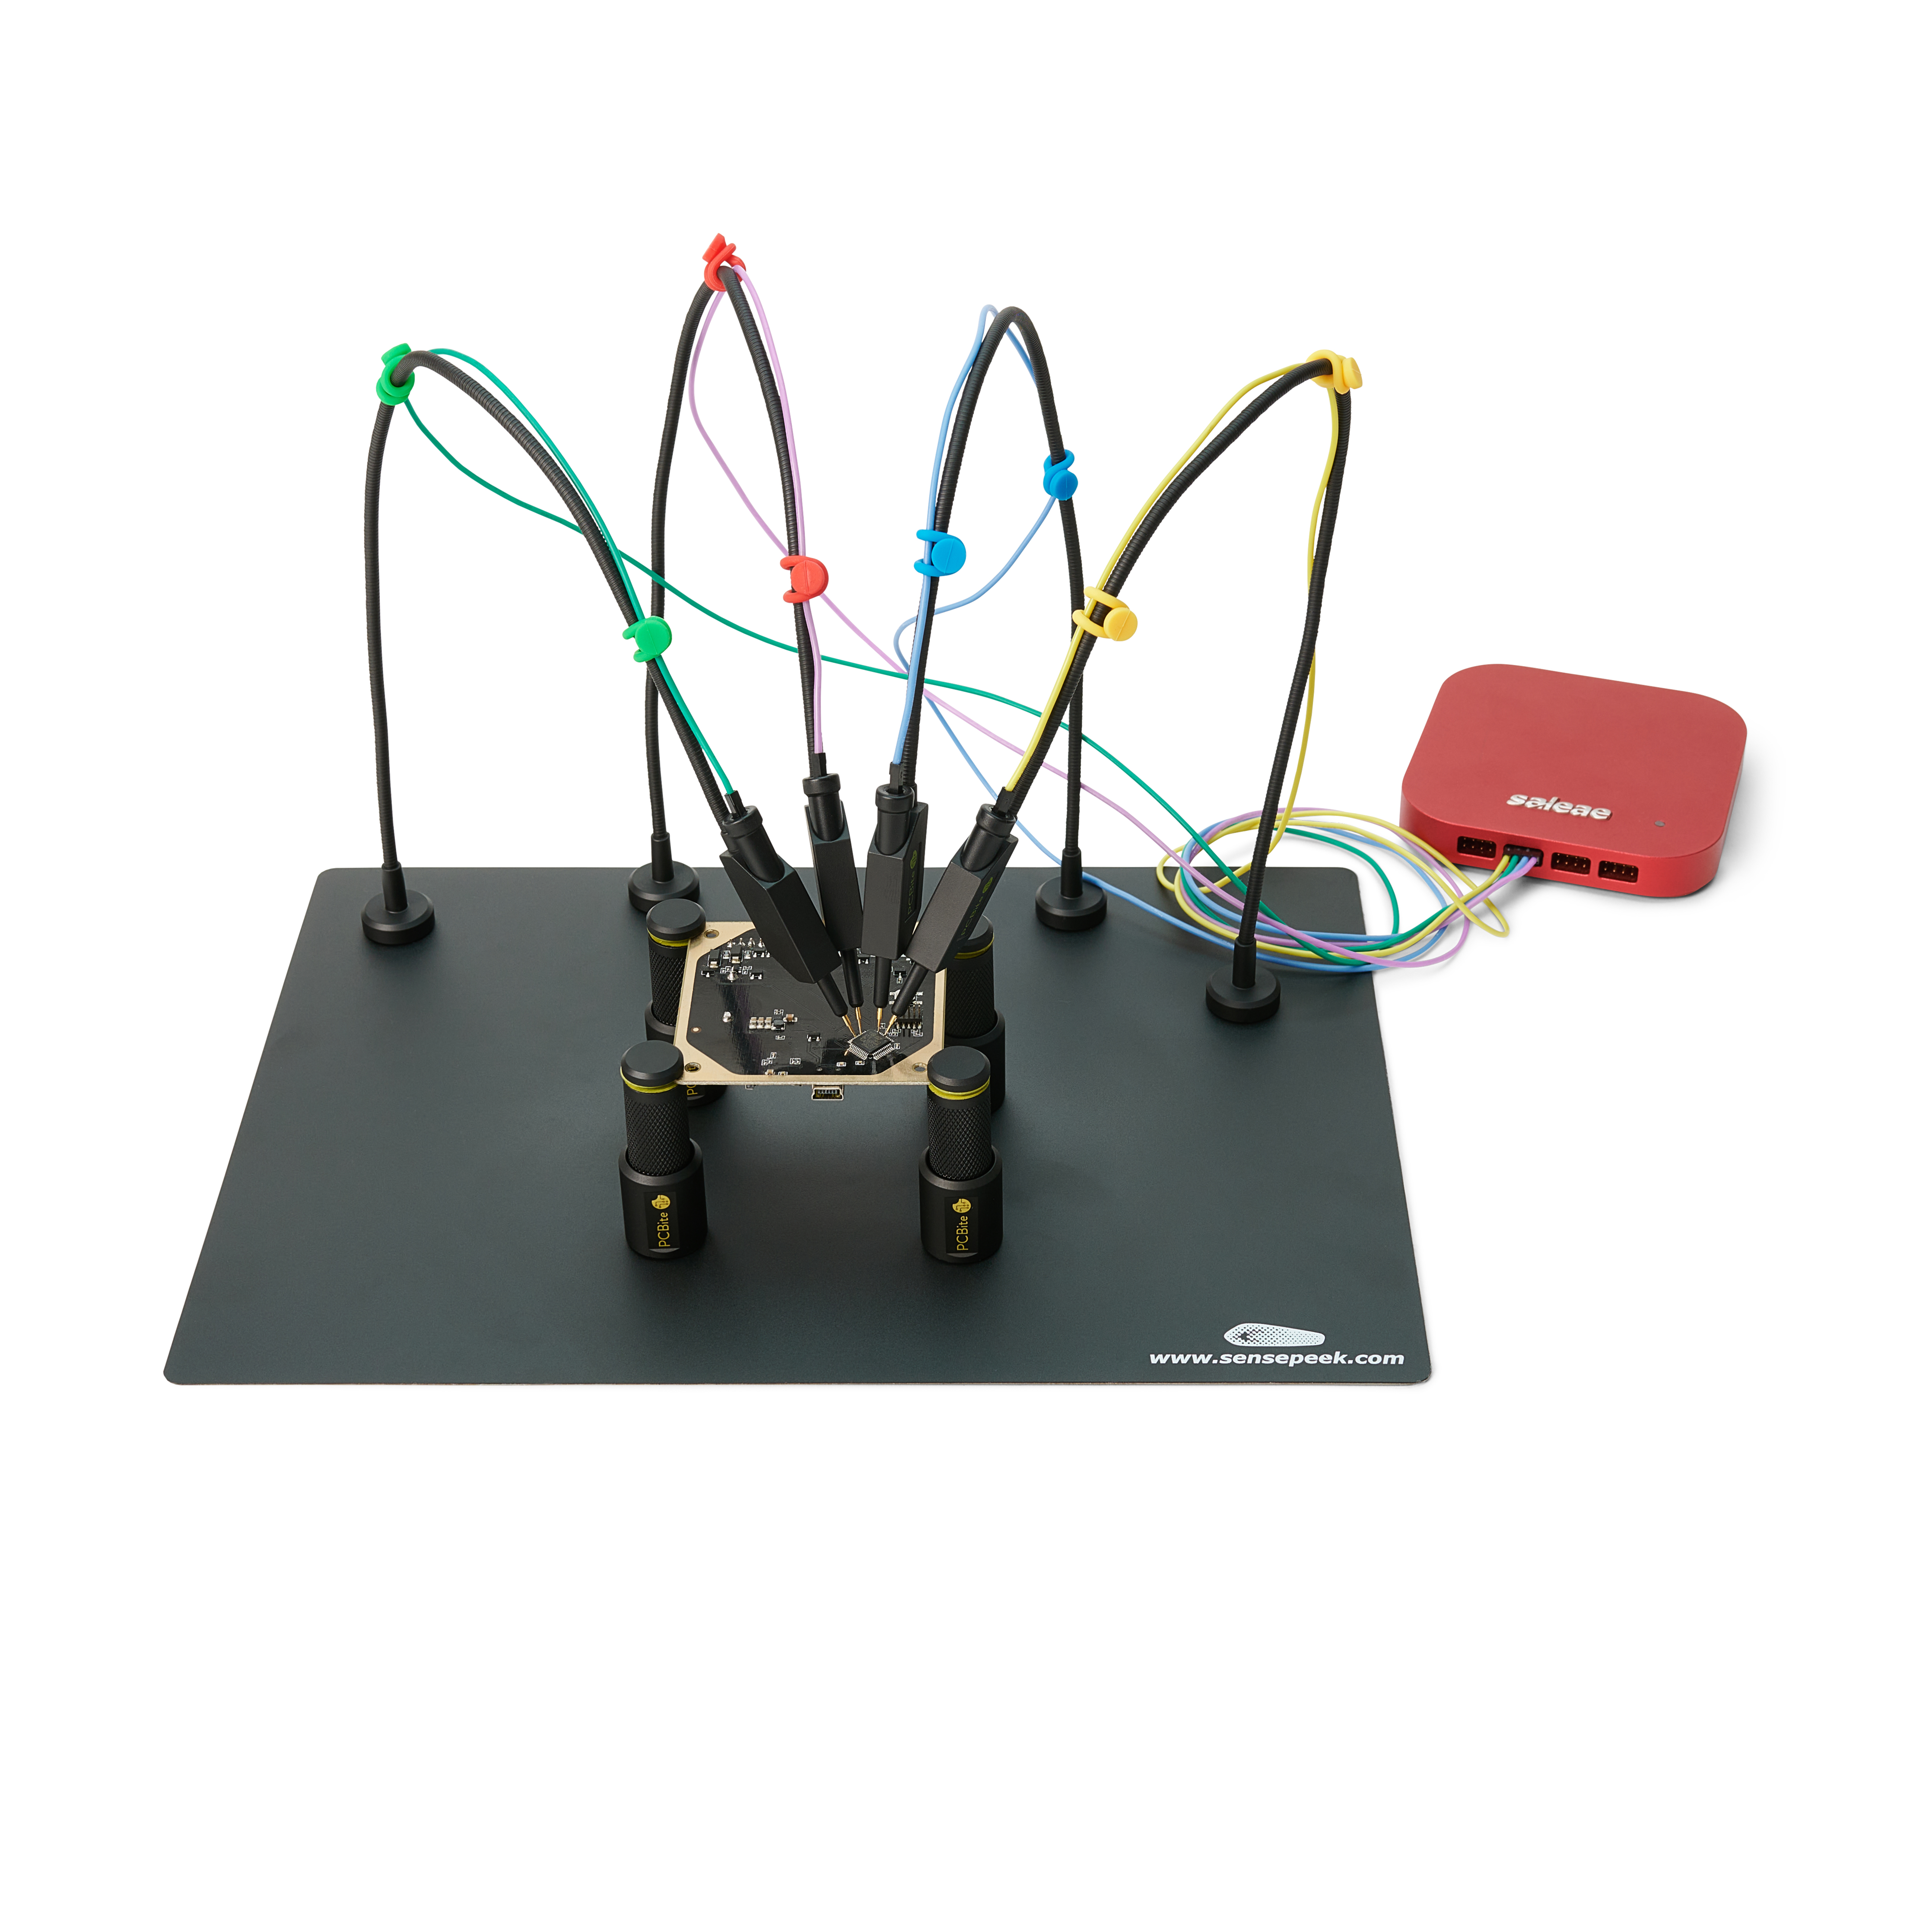 PCBite Kit with 4x SQ10 probes and test wires